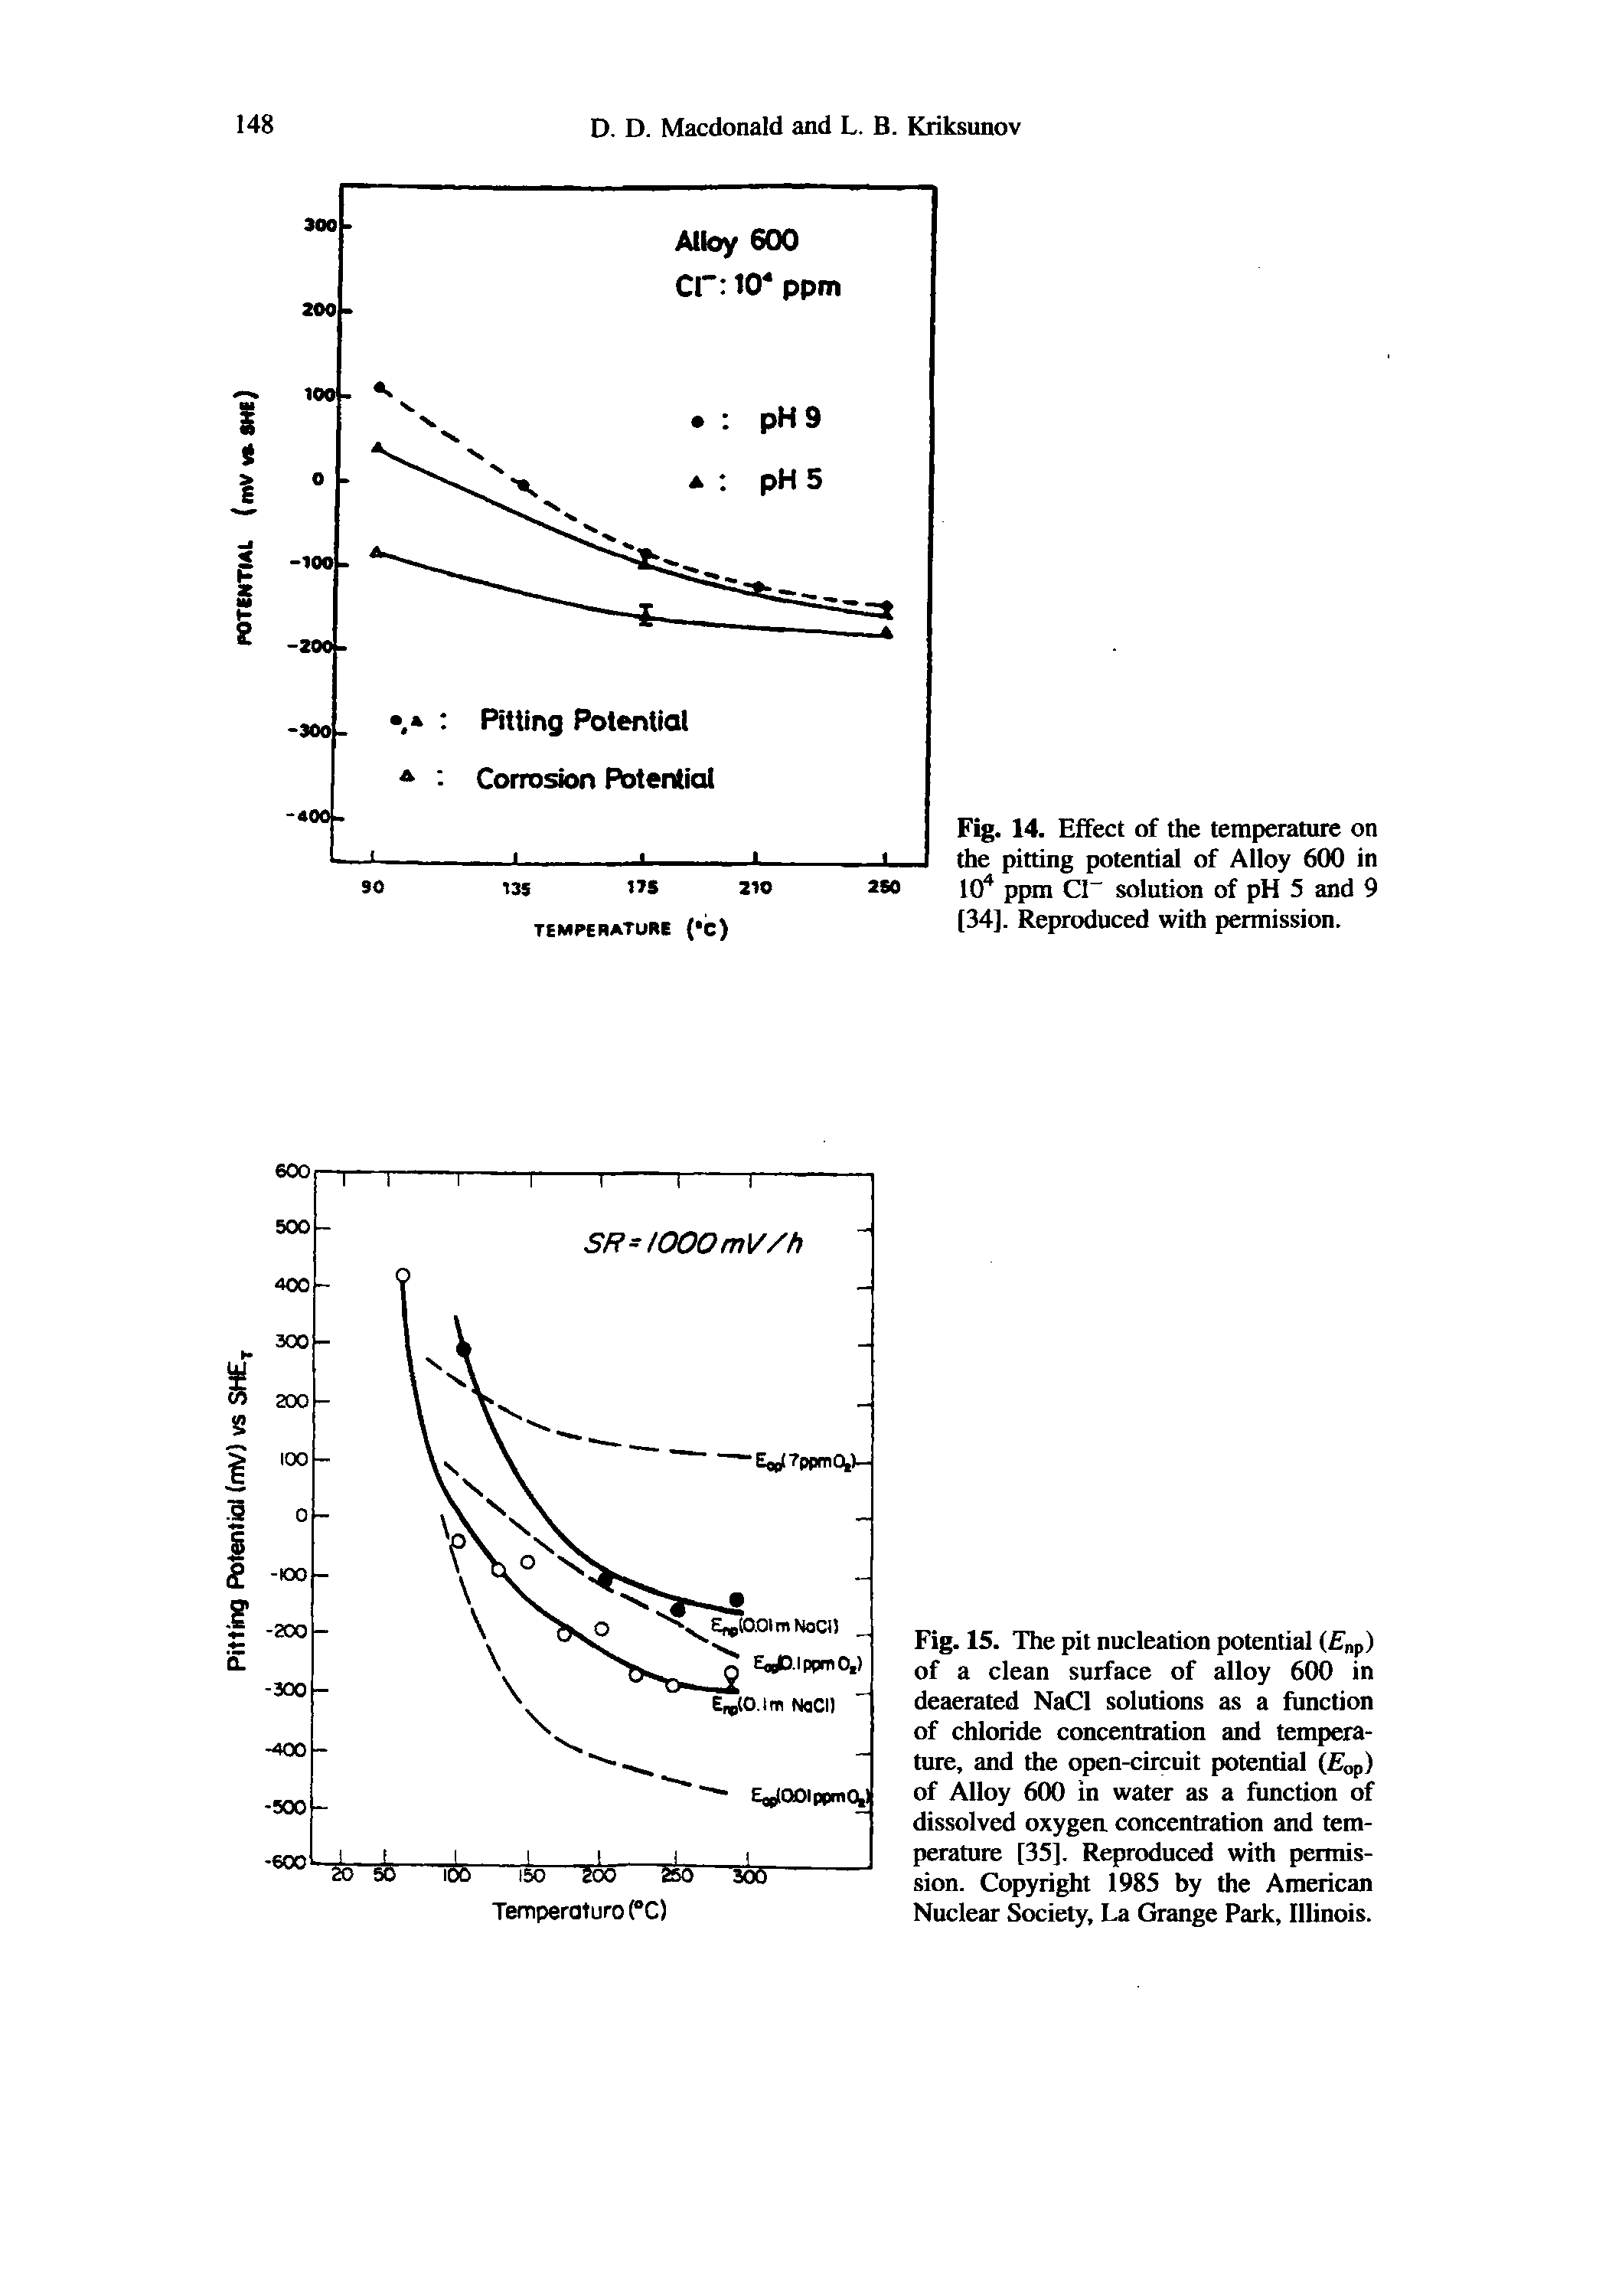 Fig. 15. The pit nucleation potential ( np) of a clean surface of alloy 600 in deaerated NaCl solutions as a function of chloride concentration and temperature, and the open-circuit potential (Eop) of Alloy 600 in water as a function of dissolved oxygen concentration and temperature [35]. Reproduced with permission. Copyright 1985 by the American Nuclear Society, La Grange Park, Illinois.